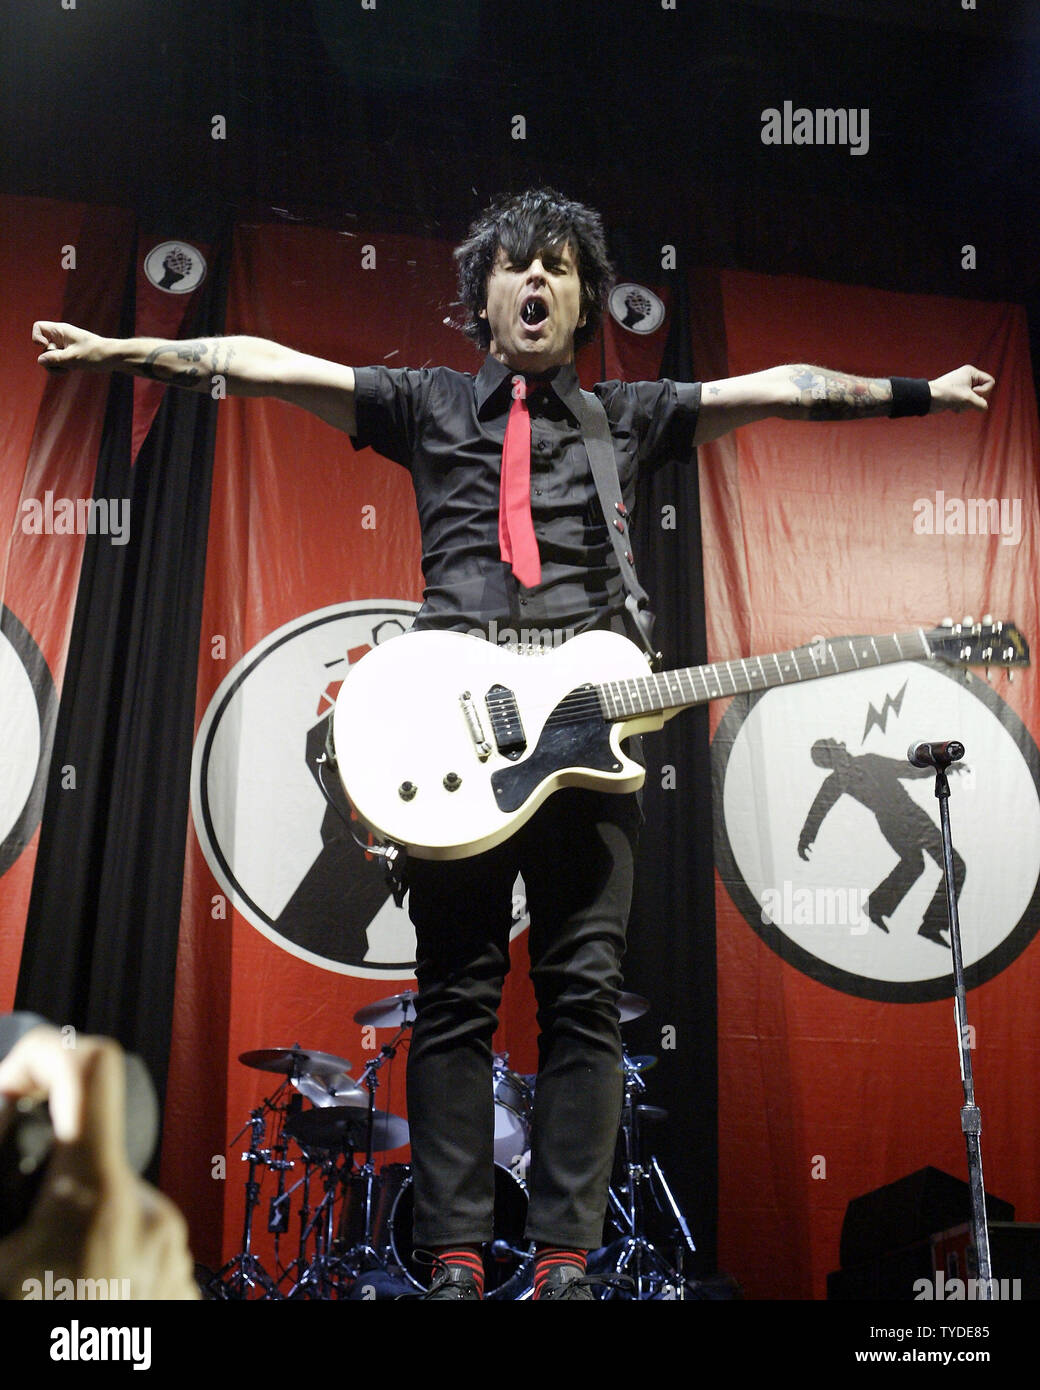 Billie Joe Armstrong with Green Day performs in concert at the Convocation Center in Coral Gables,  Florida, on April 15, 2005.  (UPI Photo/Michael Bush) Stock Photo